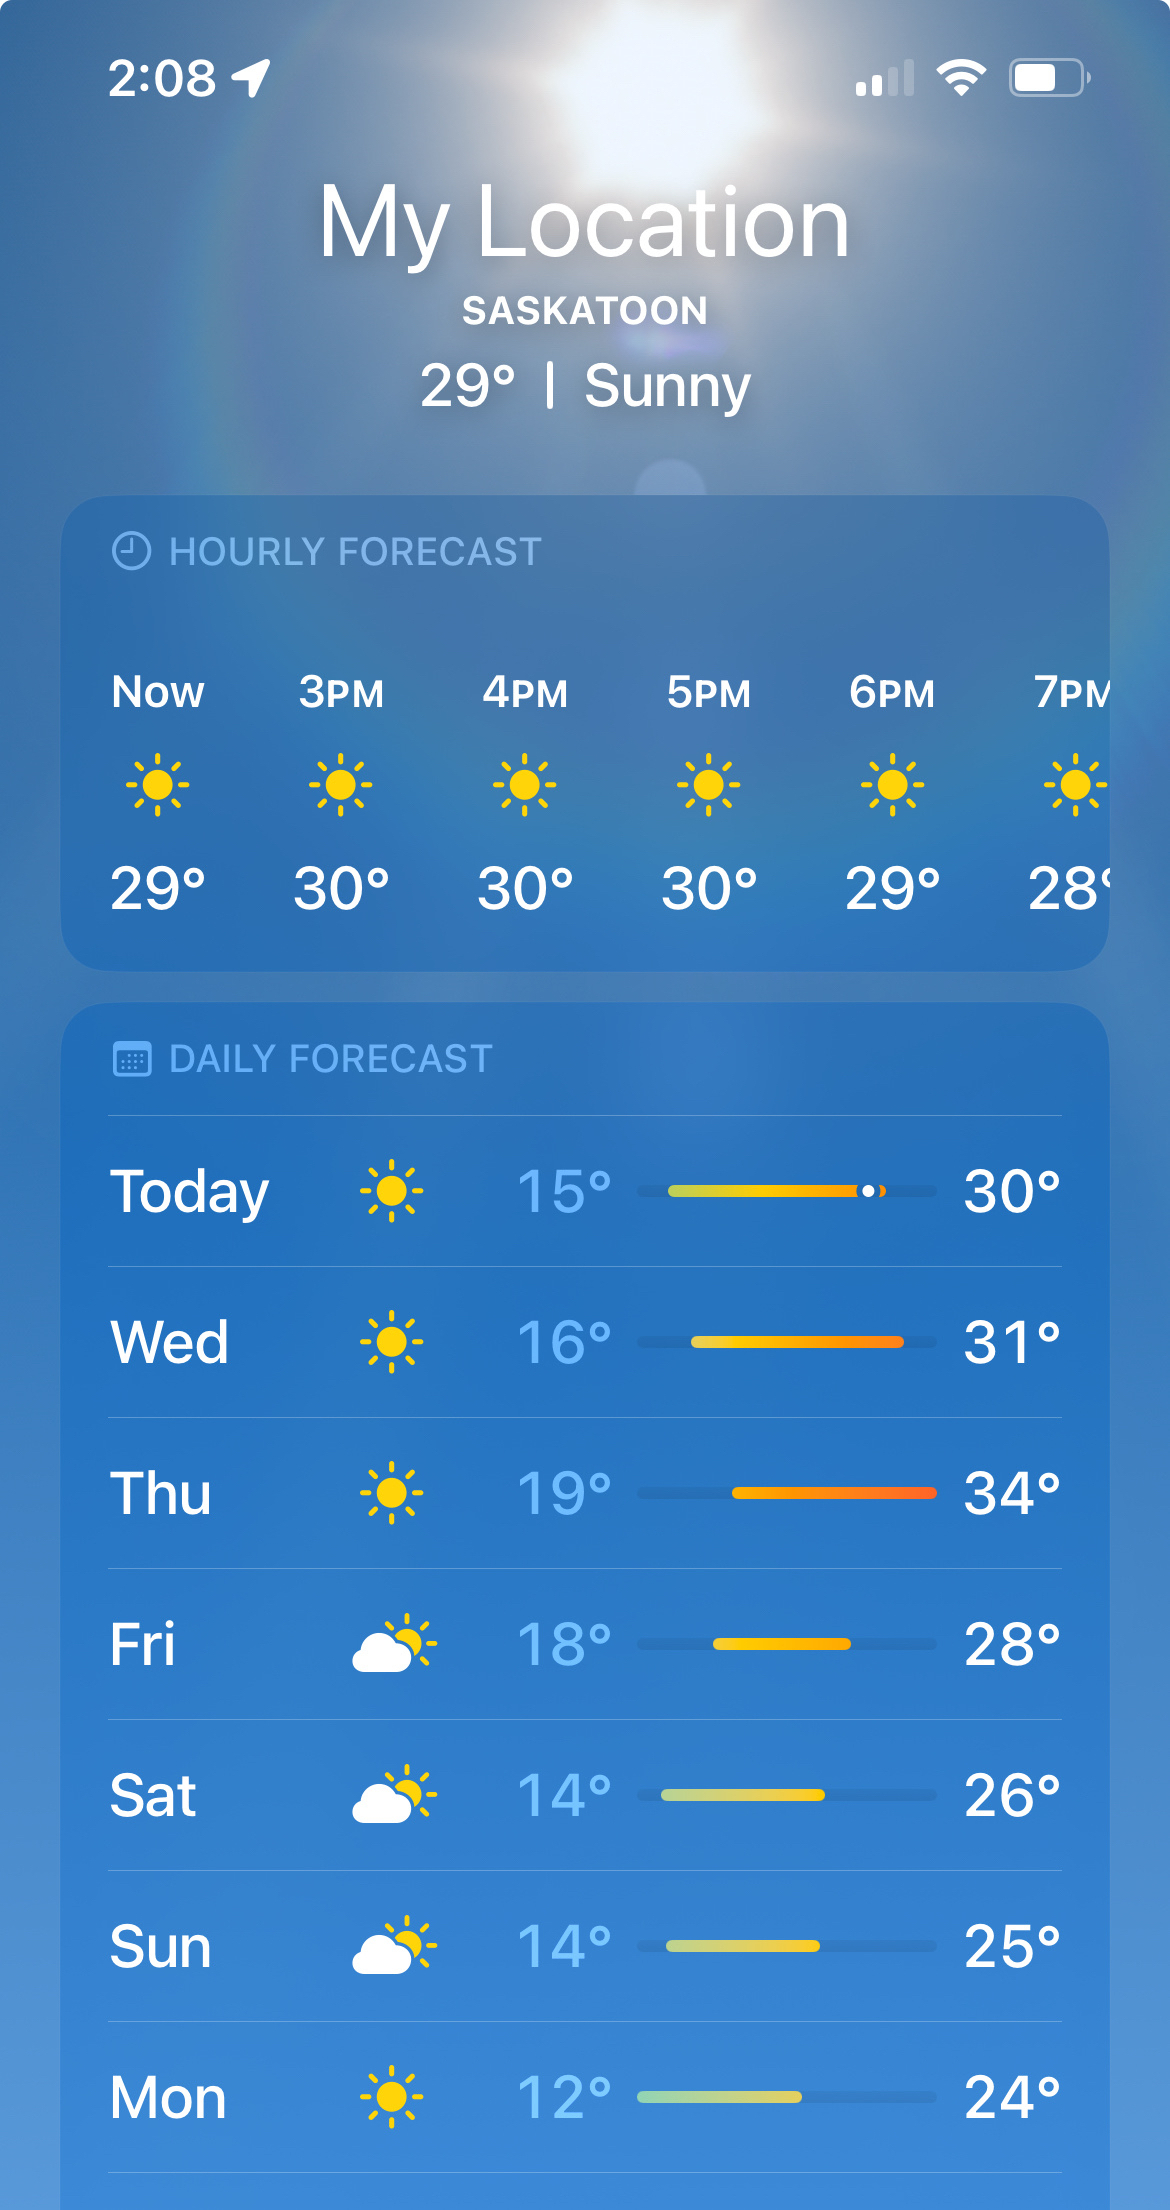 Weather for my location showing a high of 30C today and 34C on Thursday. 